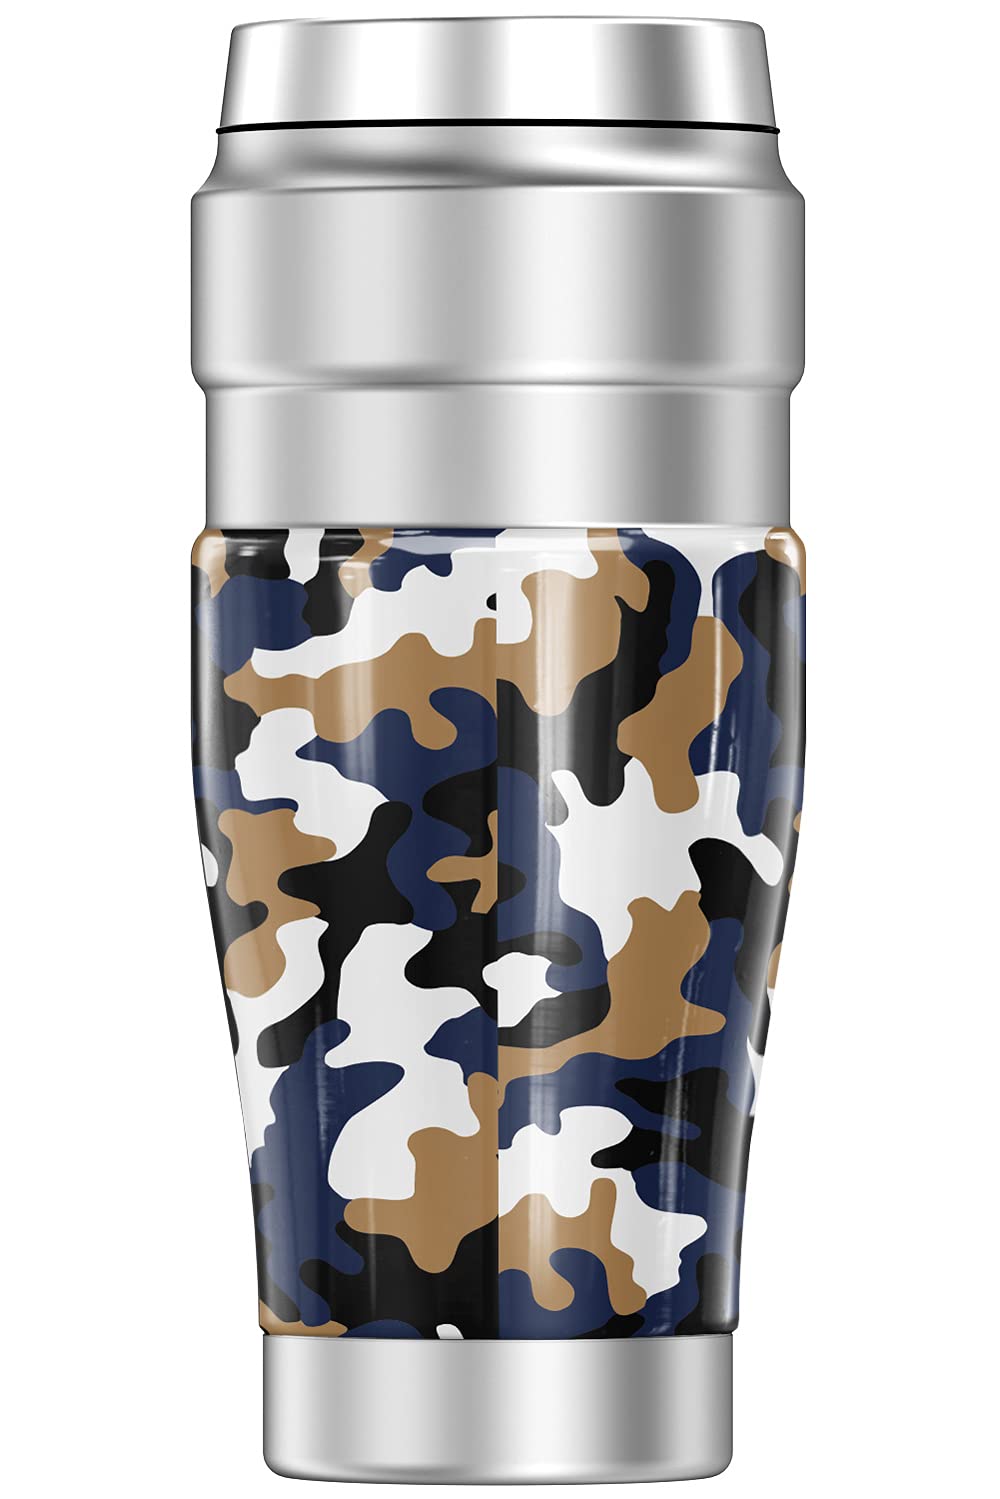 THERMOS Montana State University OFFICIAL Camo STAINLESS KING Stainless Steel Travel Tumbler, Vacuum insulated & Double Wall, 16oz